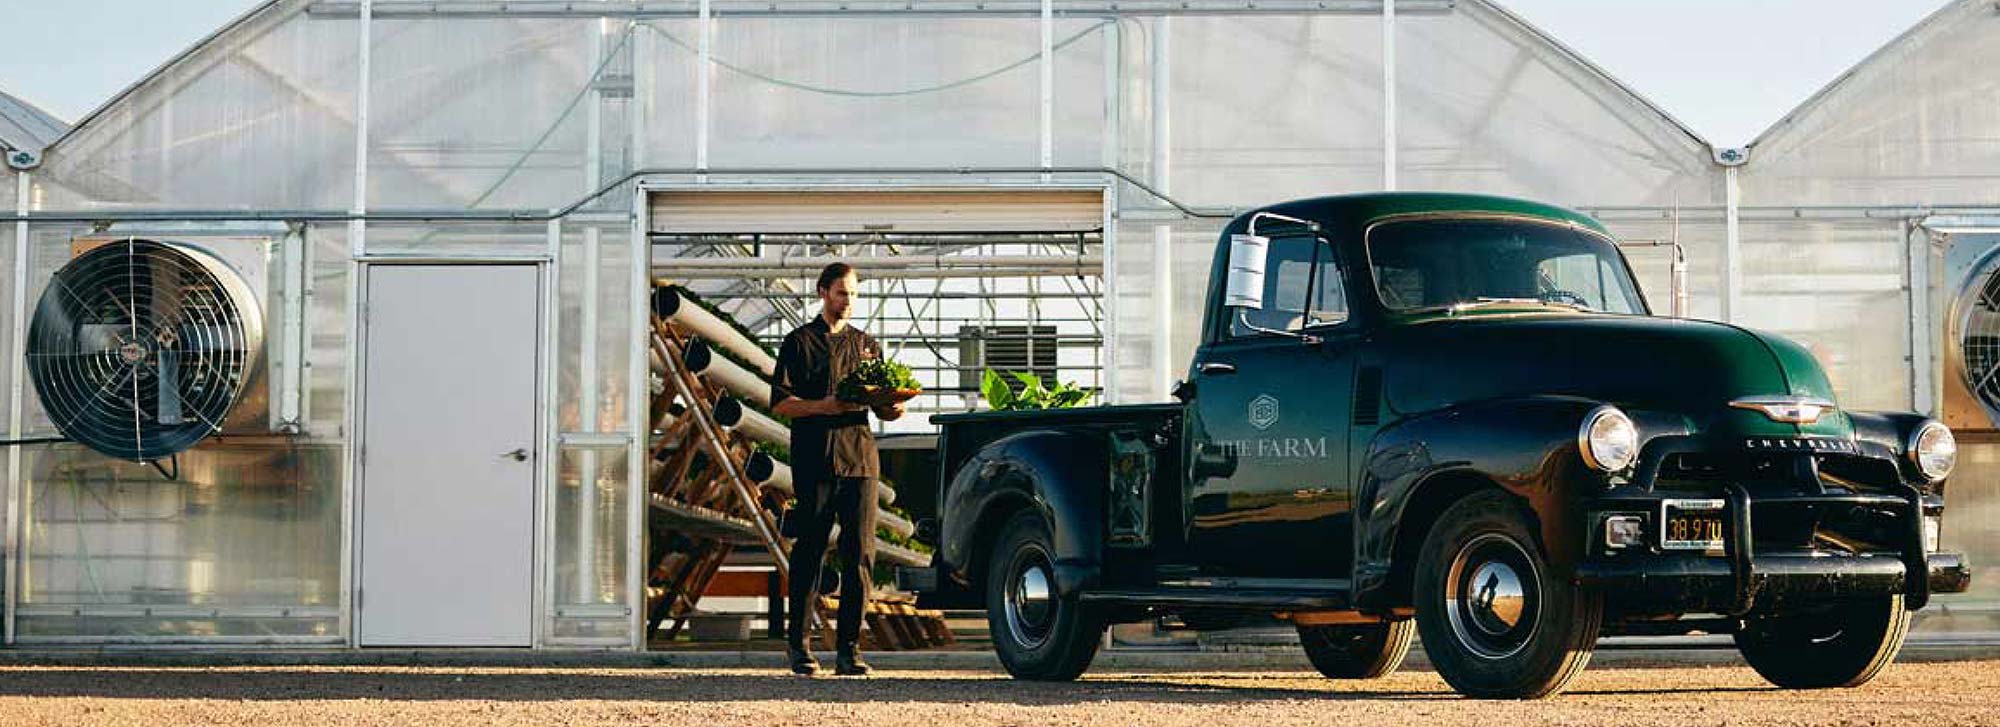 Serge Boon holding plants next to a truck outside of a greenhouse.